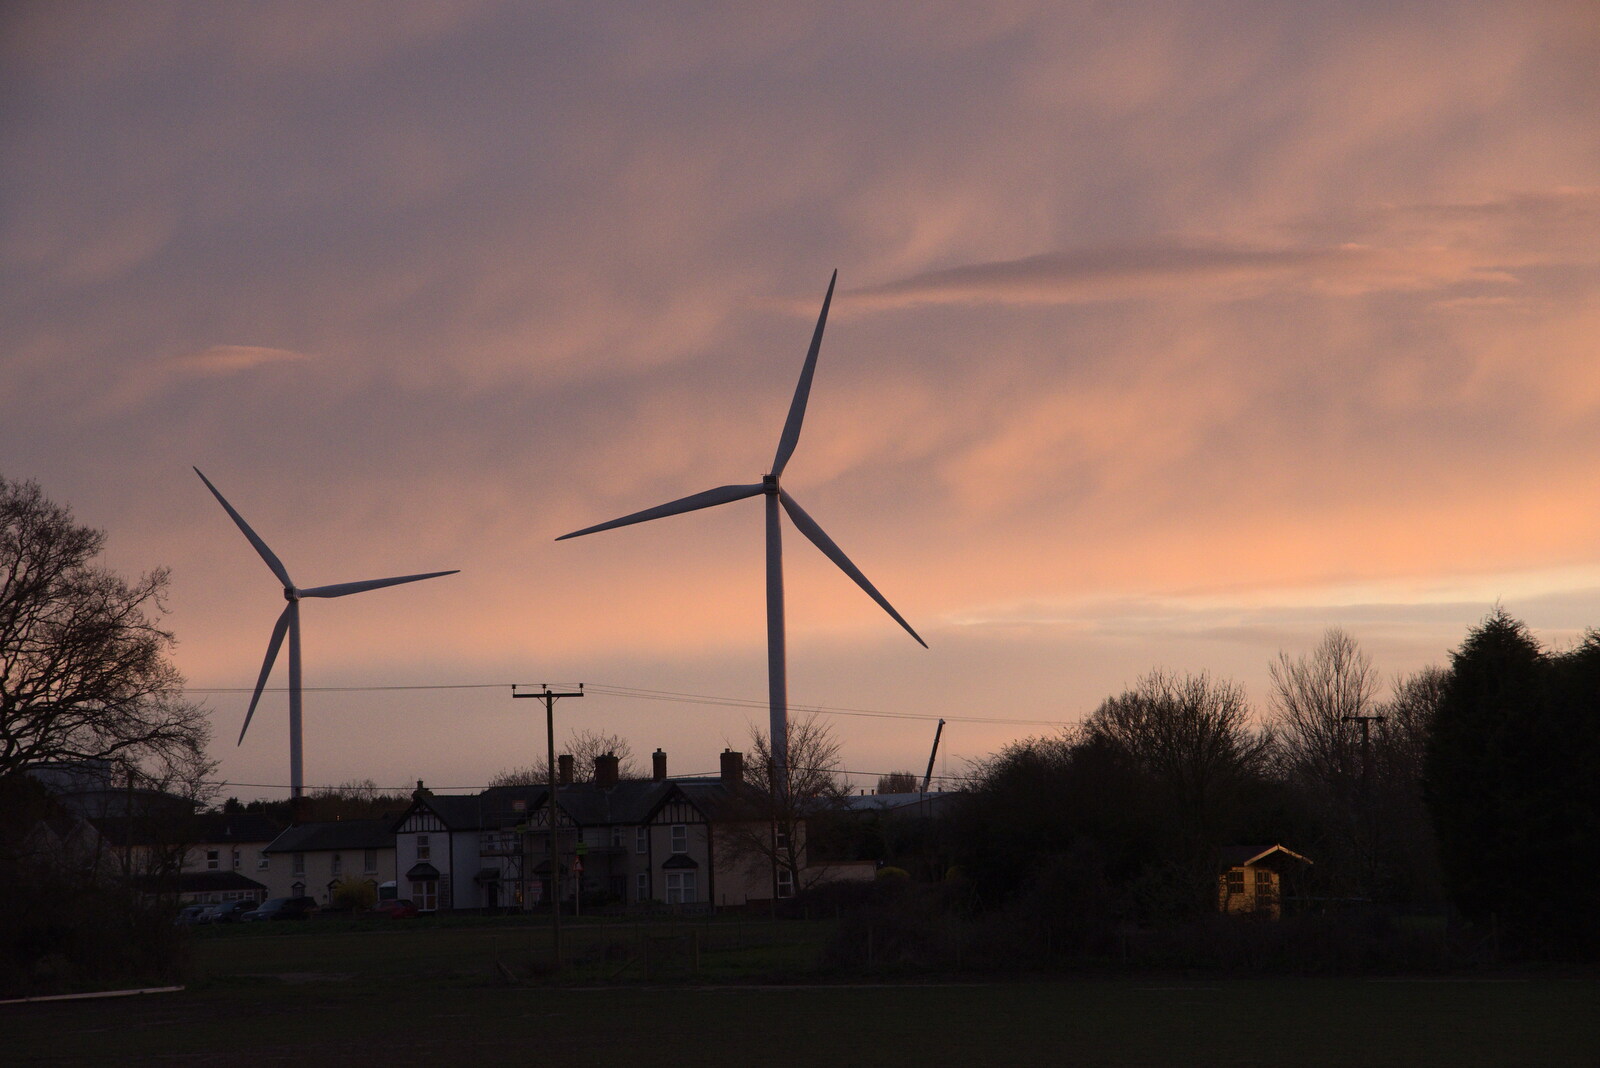 Wind turbines in the sunset from The Oaksmere: 28 Weeks Later, Brome, Suffolk - 21st March 2021